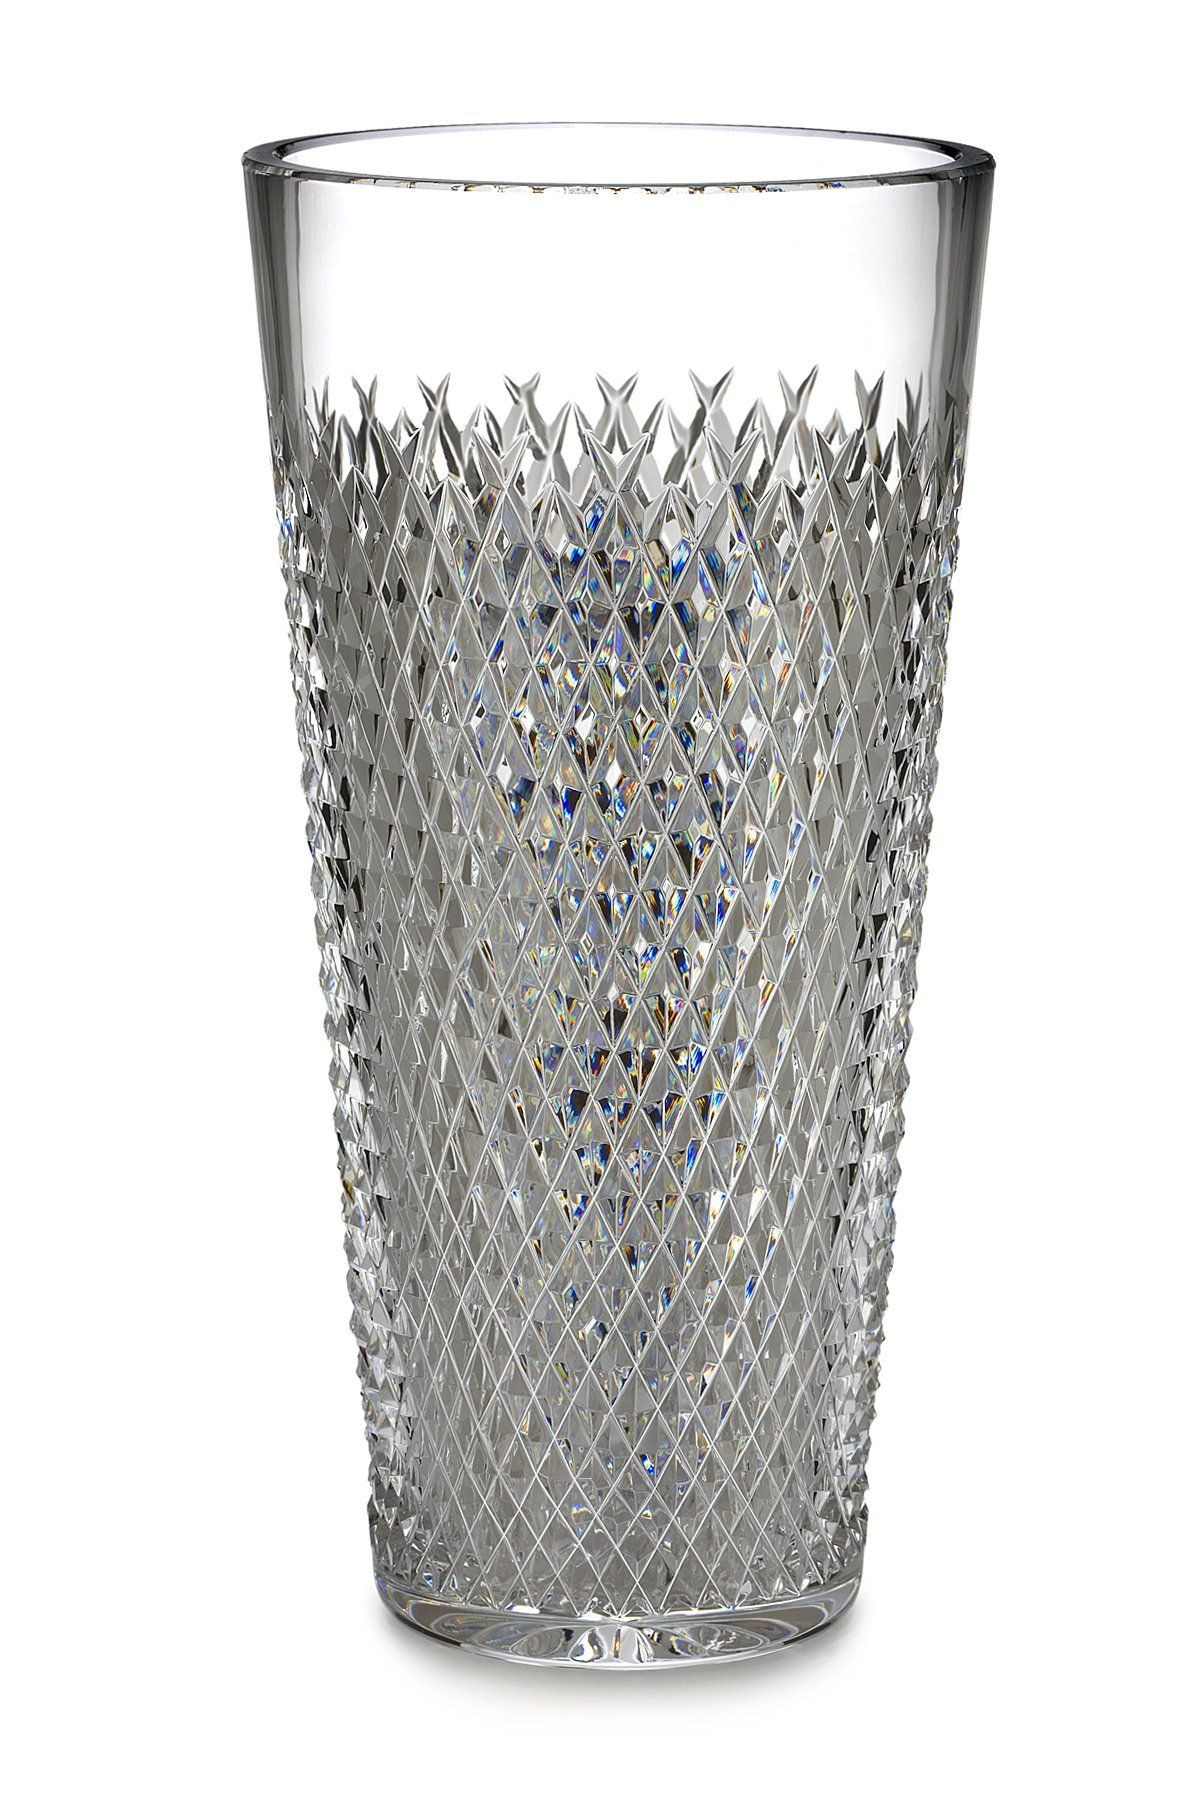 15 Stunning Marquis by Waterford 9 Inch Vase 2024 free download marquis by waterford 9 inch vase of waterford alana 12 inch vase 12 inch vase crystal alana vases regarding waterford alana 12 inch vase 12 inch vase crystal alana